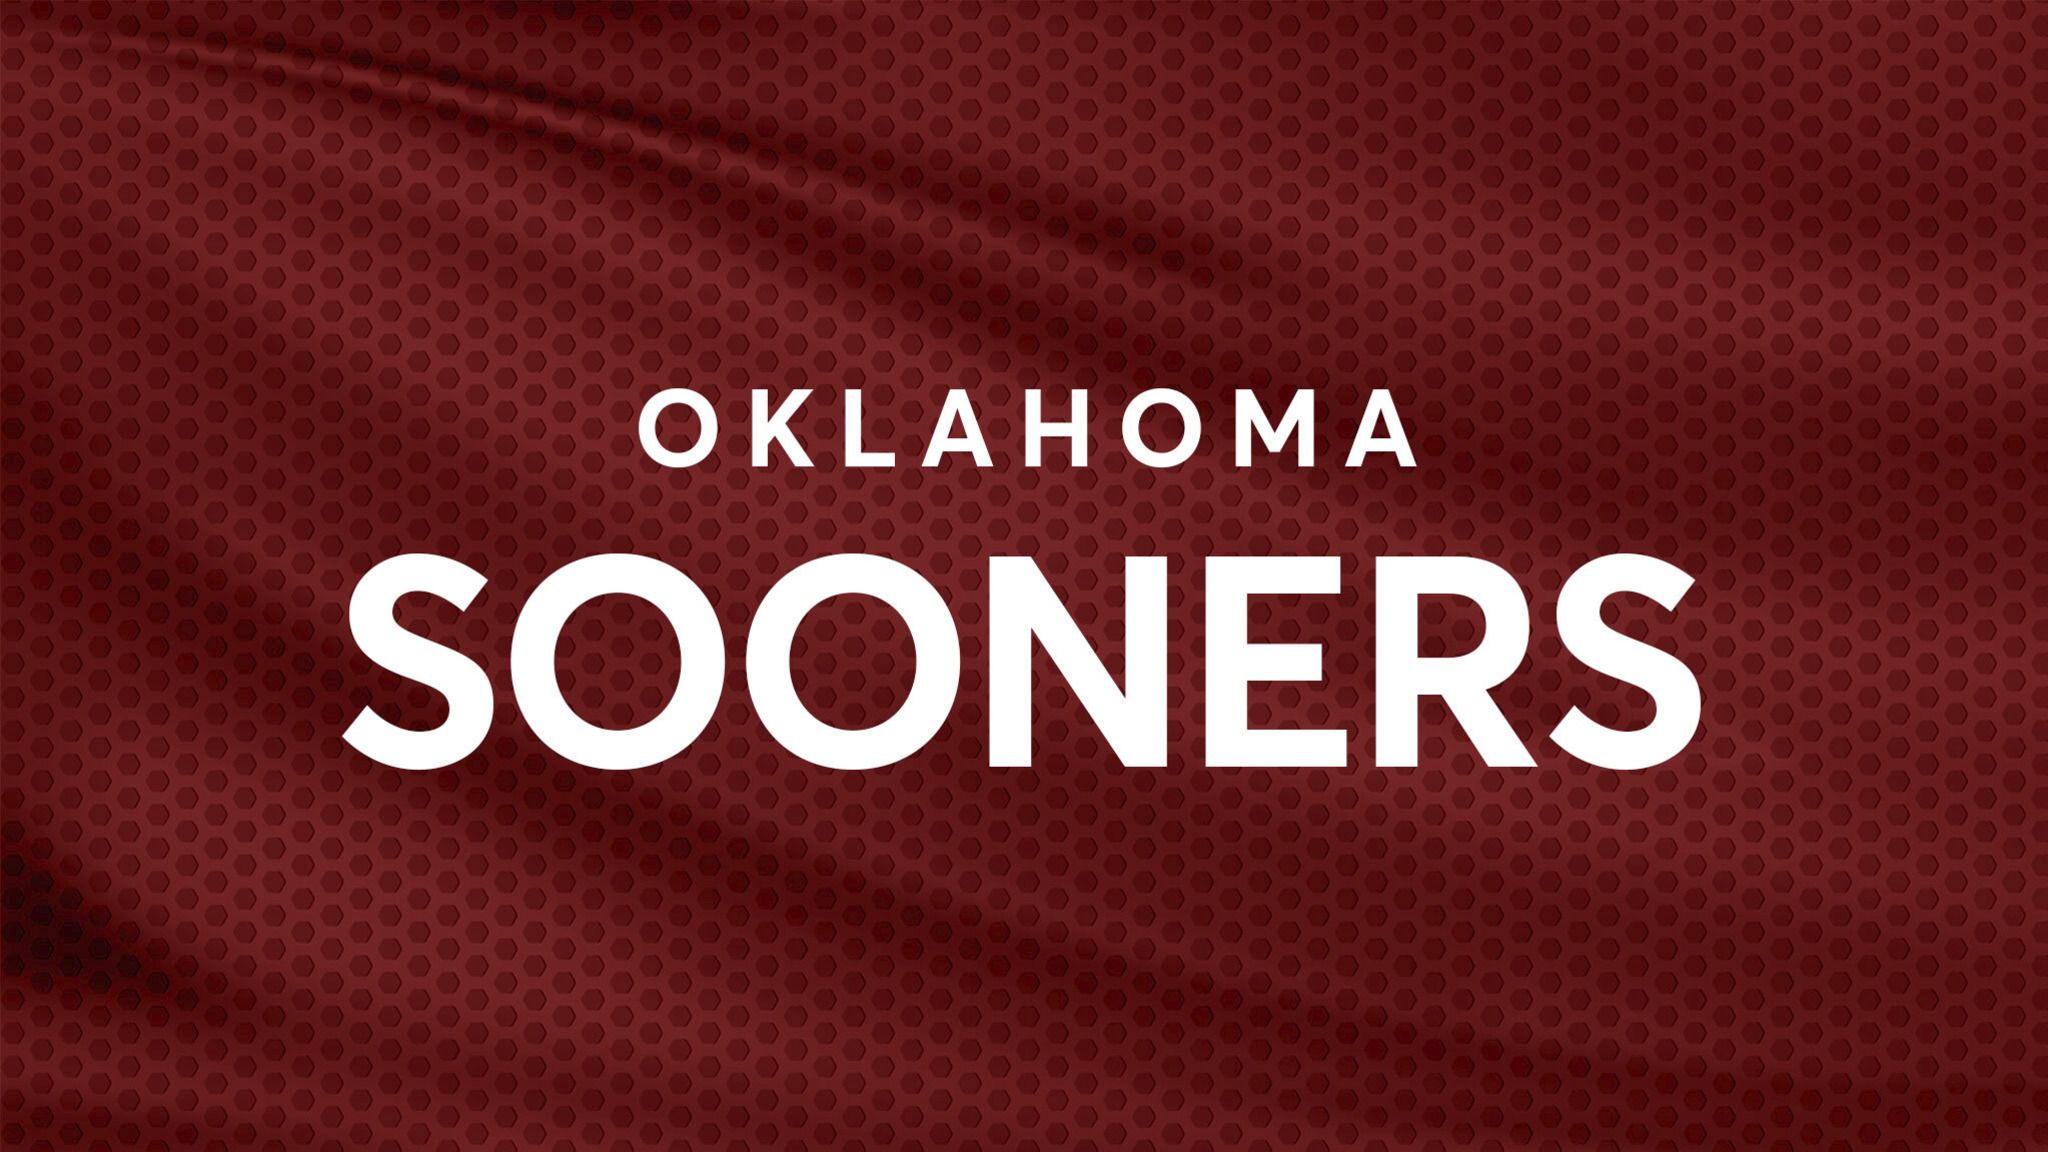 Oklahoma Sooners Softball Tickets | 2022 College Tickets & Schedule